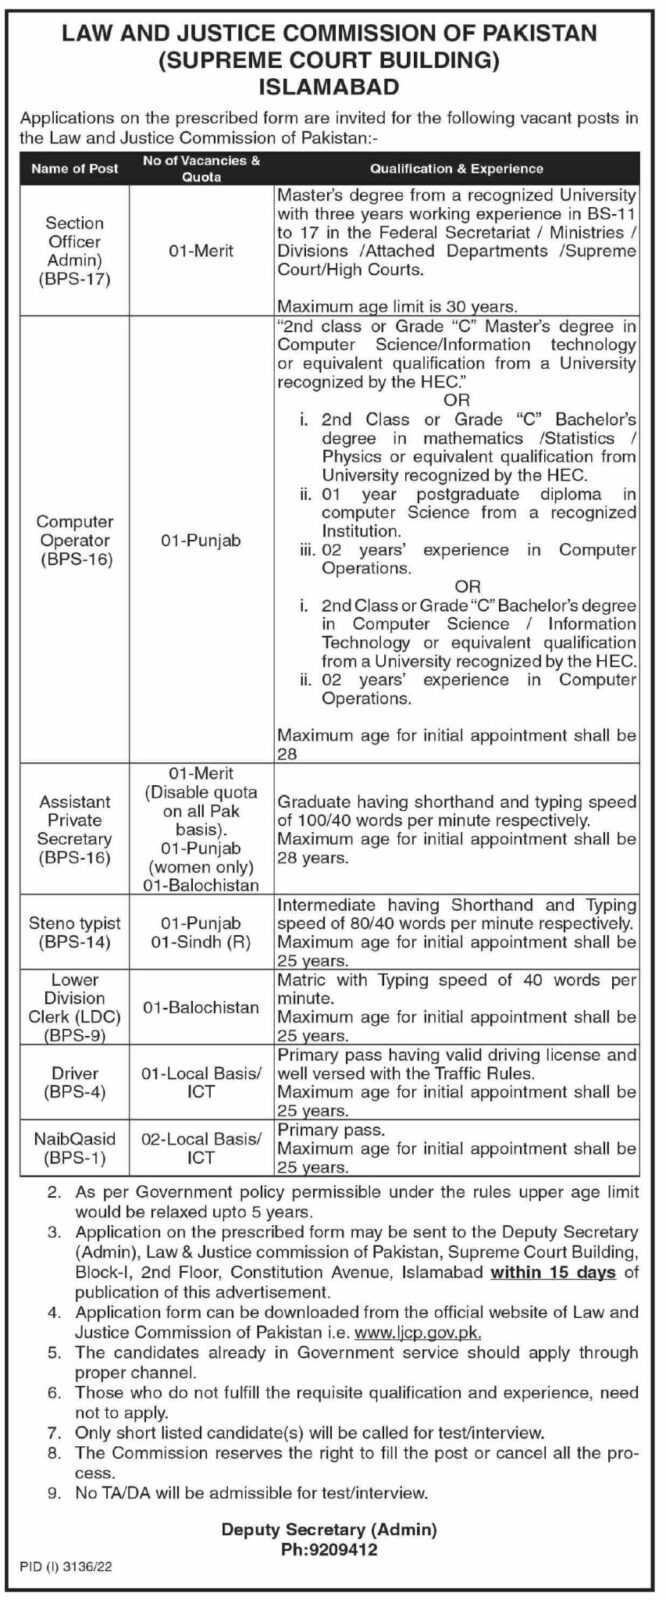 Jobs at Law & Justice Commission 2022